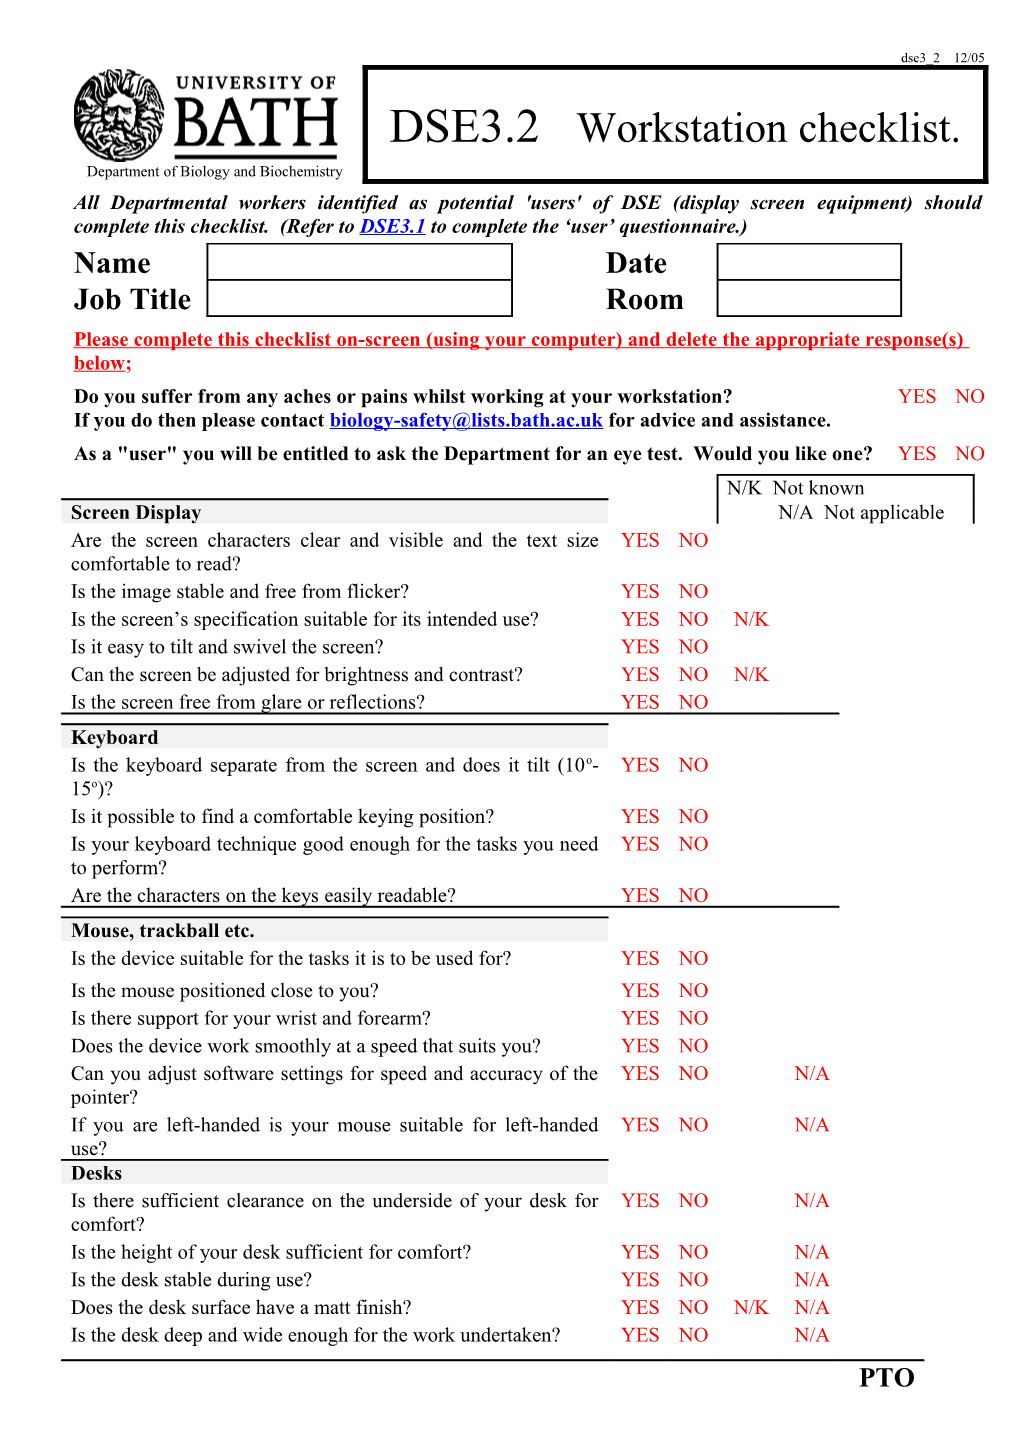 Questionnaire for the Identification of Users